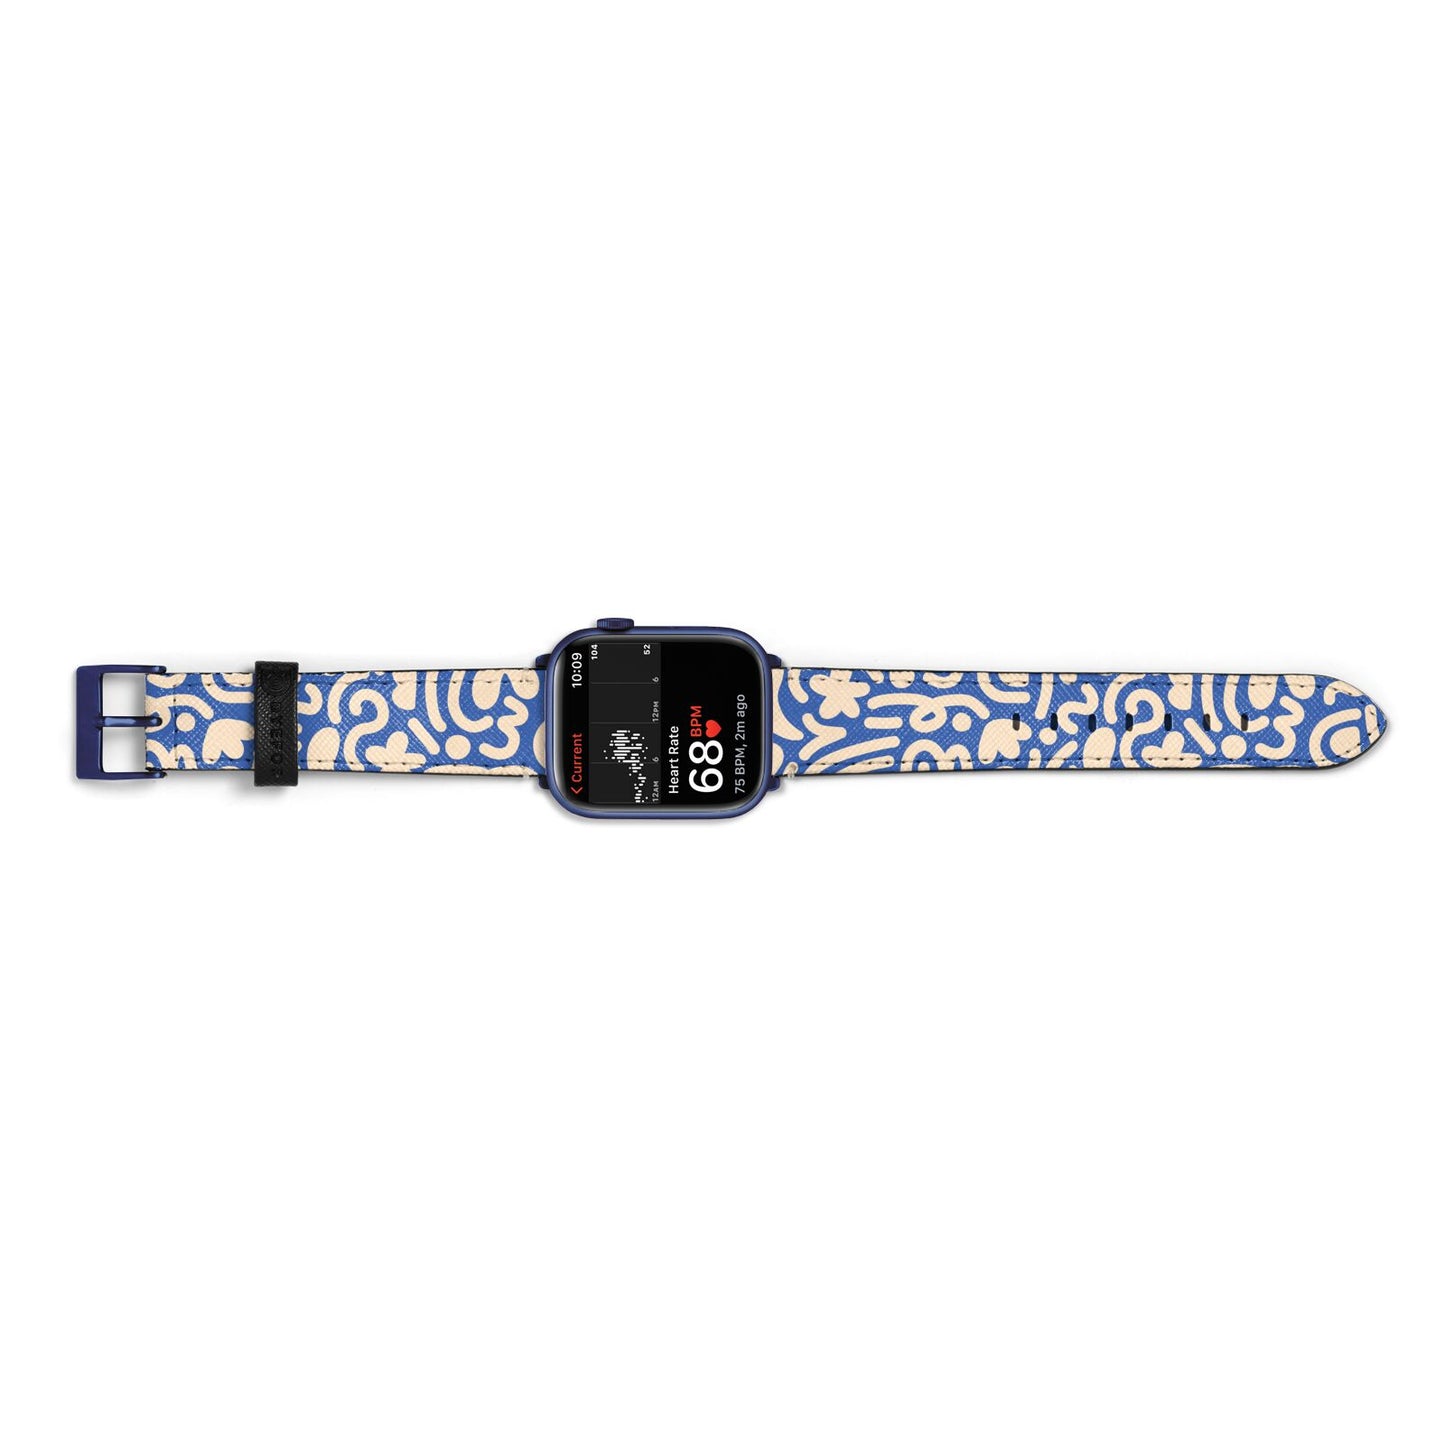 Abstract Apple Watch Strap Size 38mm Landscape Image Blue Hardware